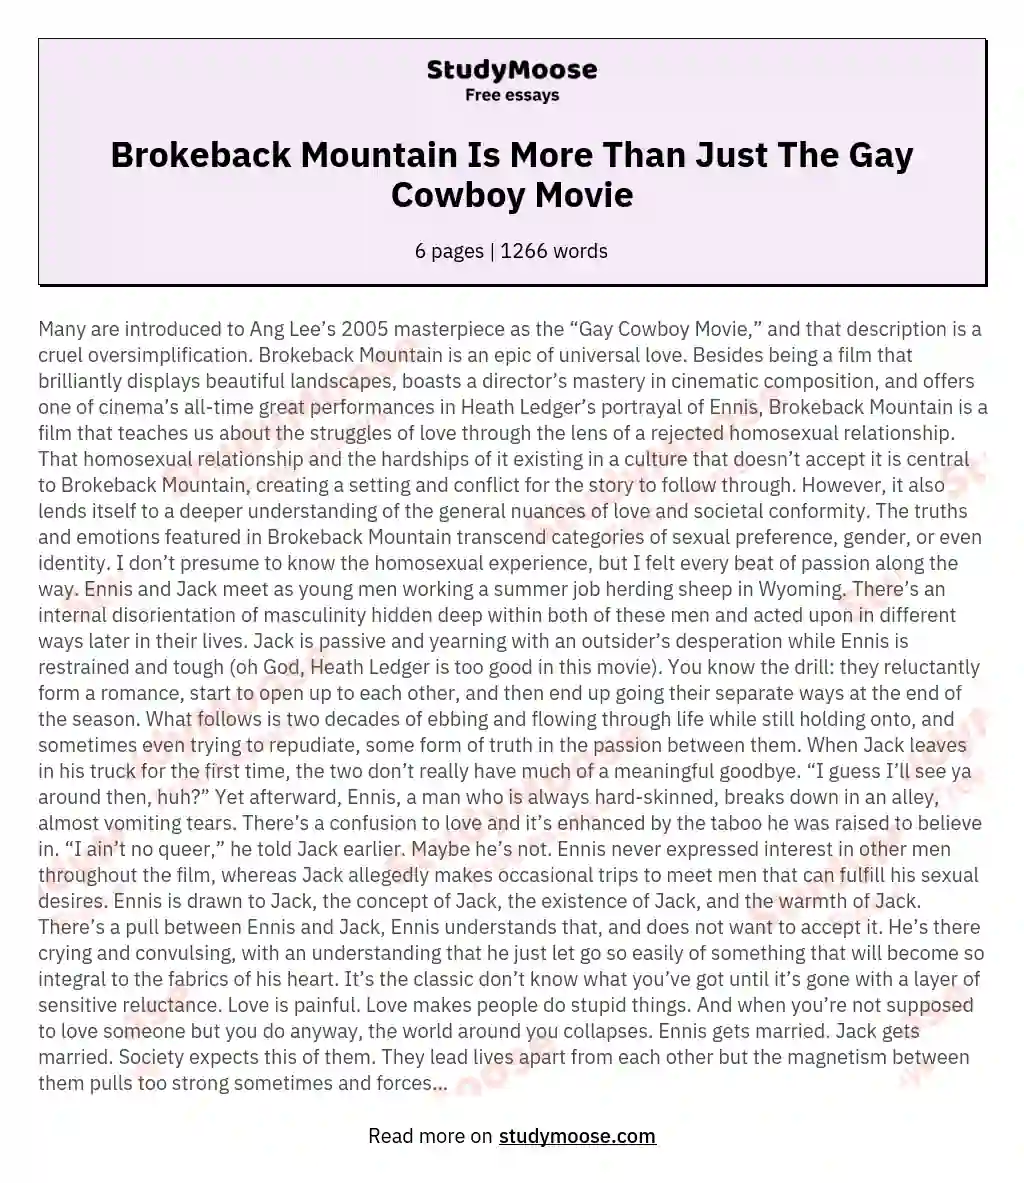 Brokeback Mountain Is More Than Just The Gay Cowboy Movie essay